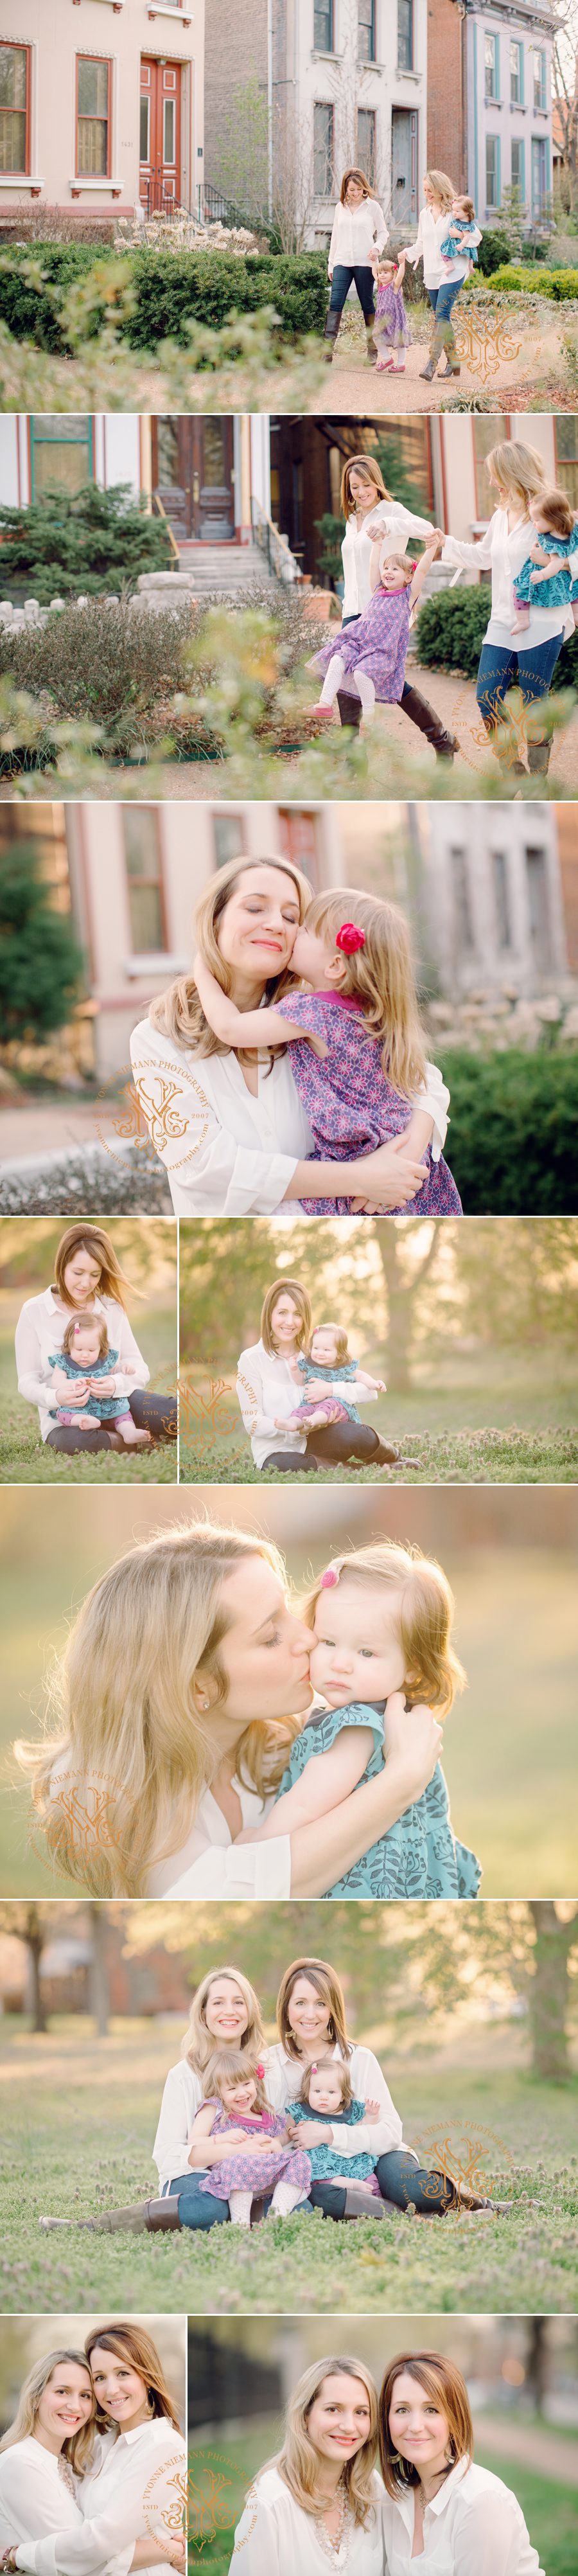 Beautiful family Spring portraits with a wonderful glow in St. Louis taken by Yvonne Niemann Photography.